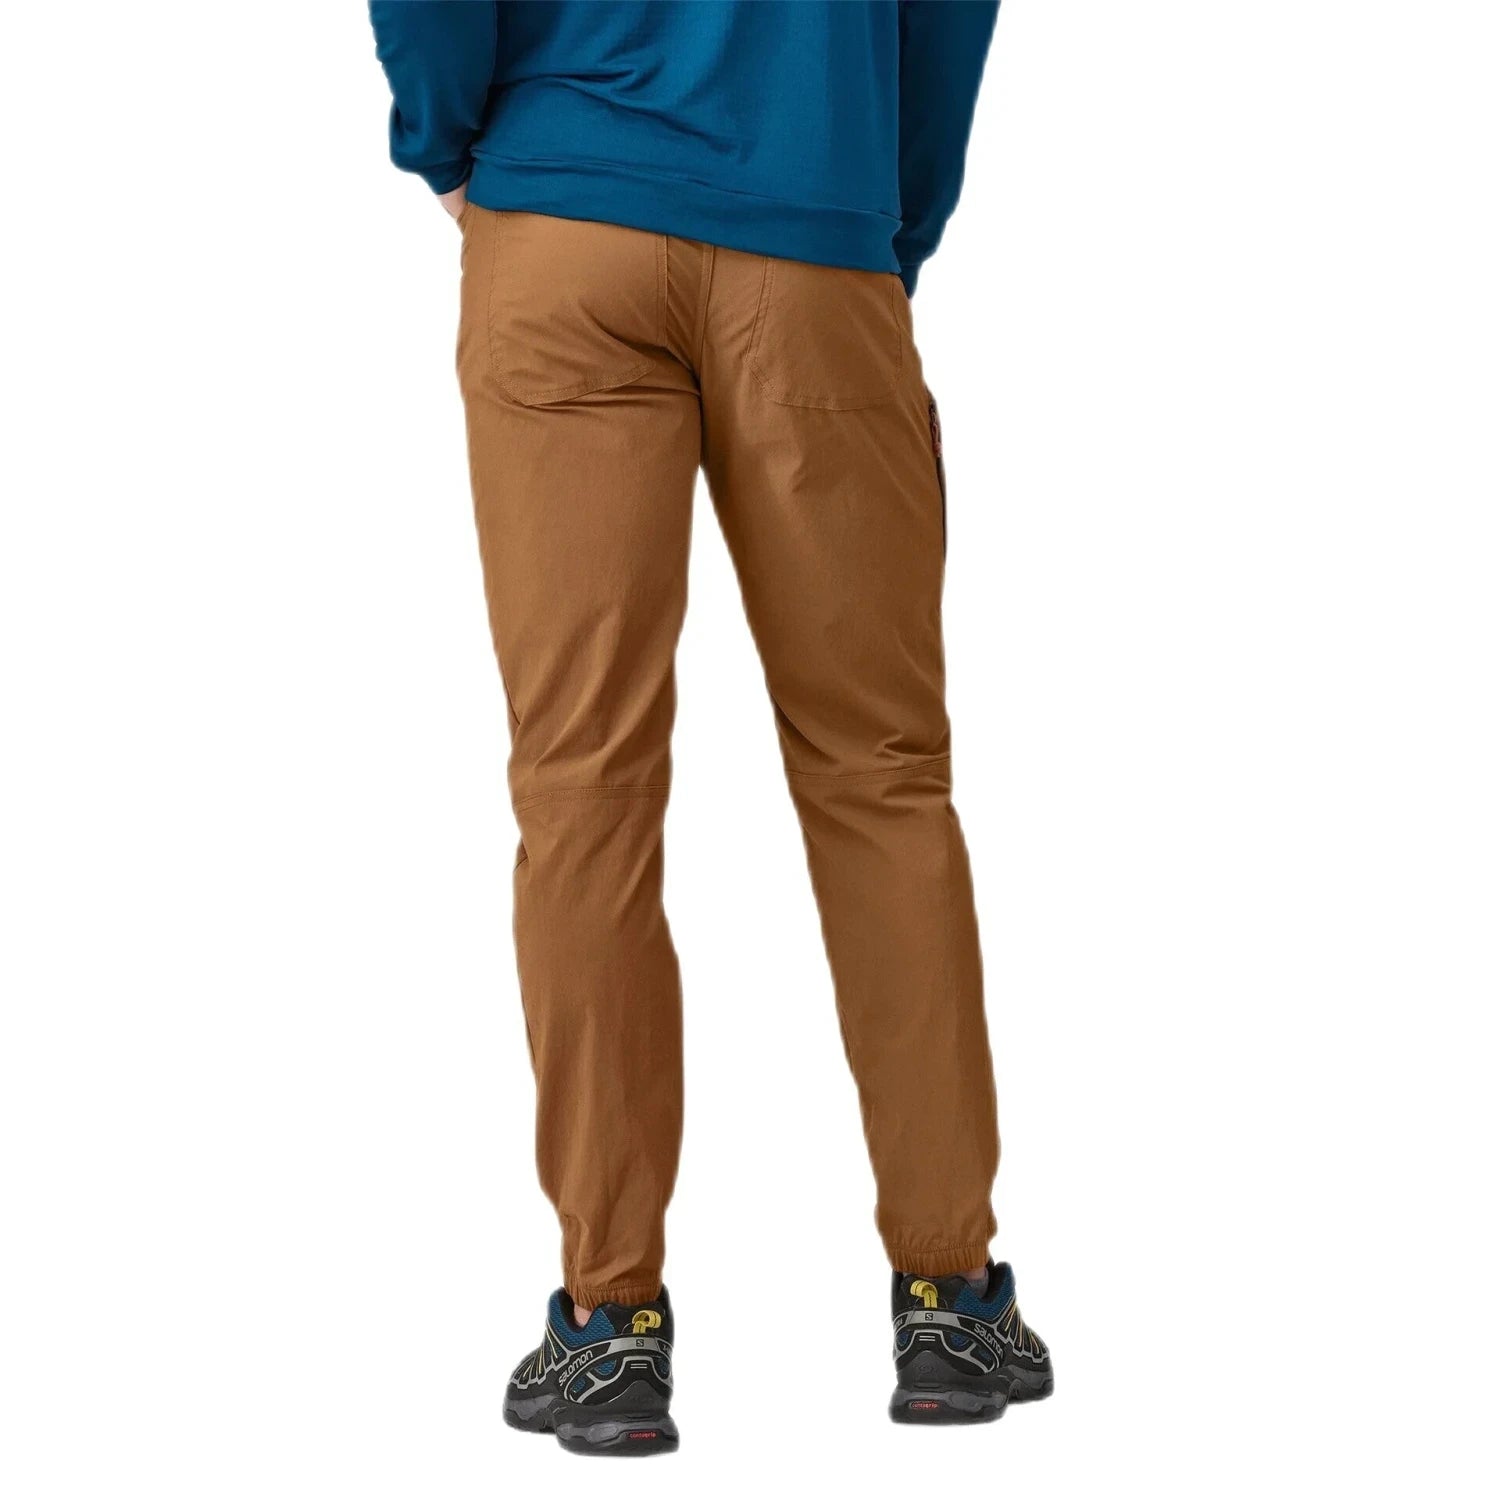 Patagonia M's Quandary Joggers, Tree Ring Brown, back view on model